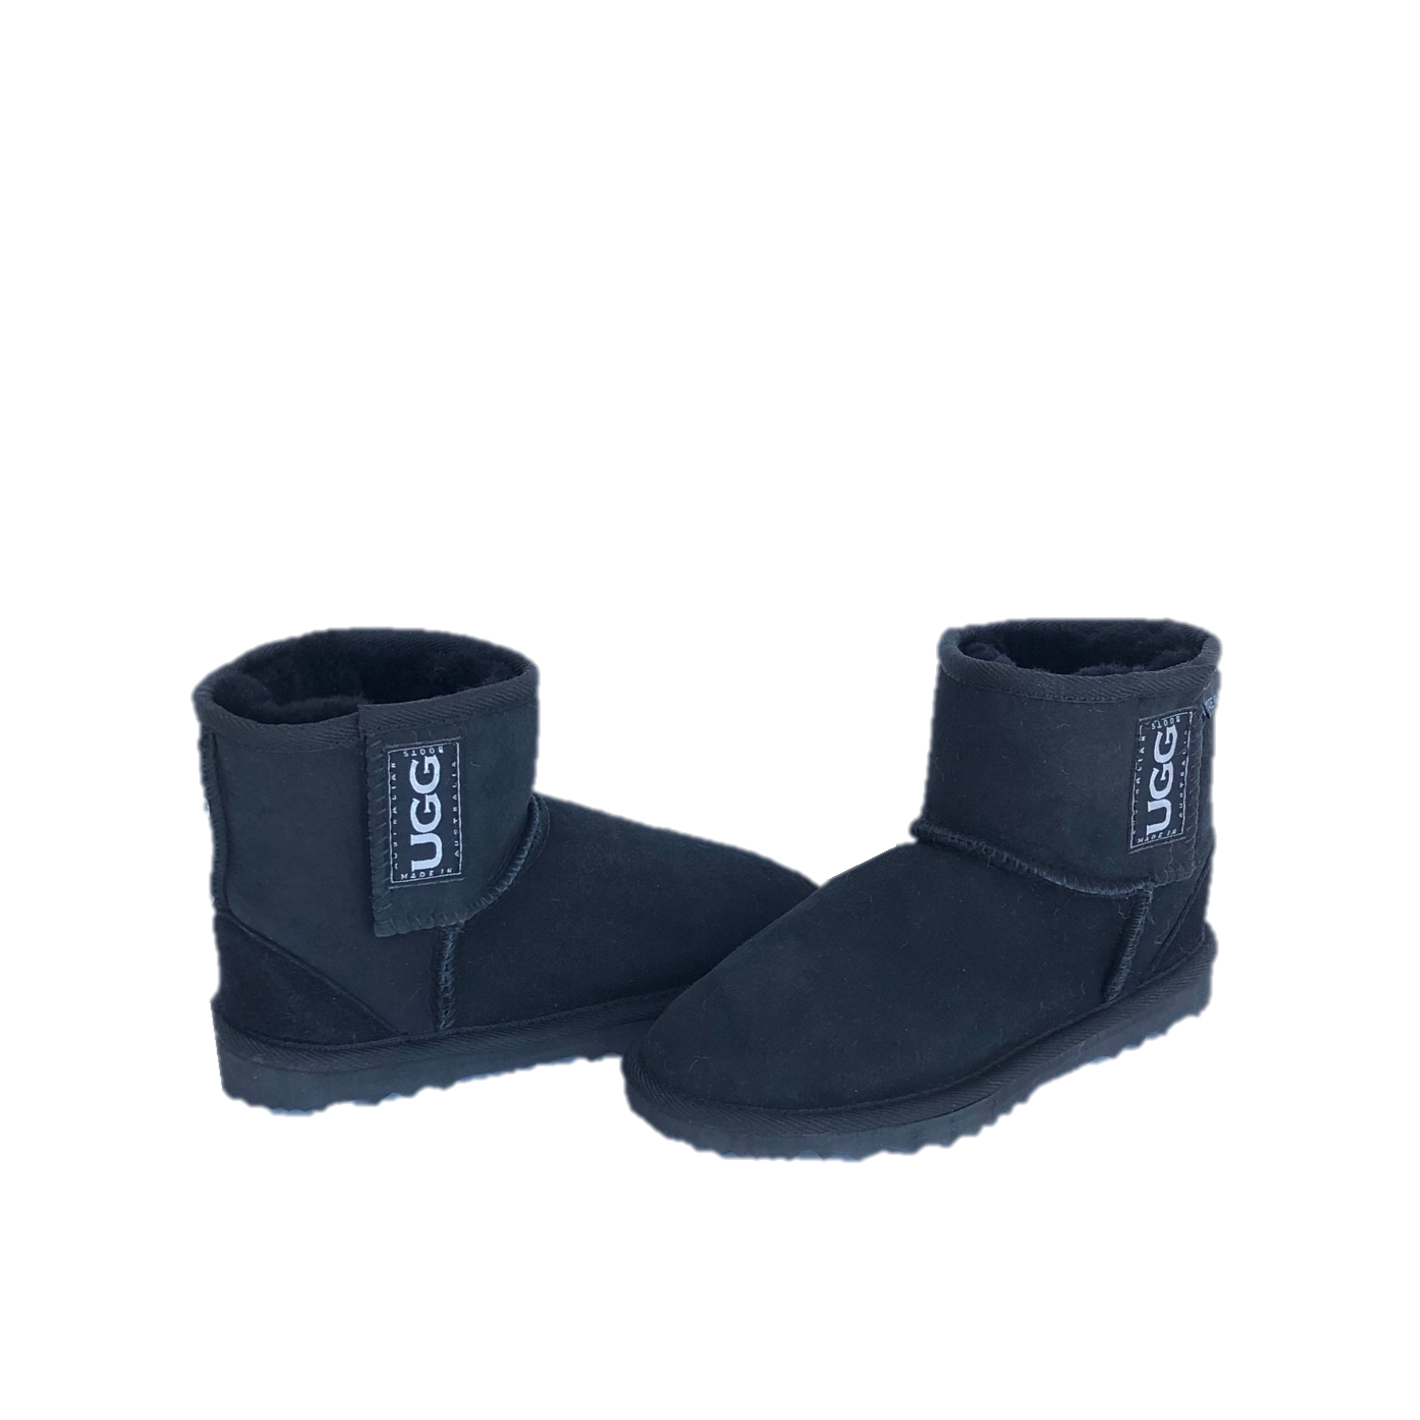 Kid's Ugg Boots in Black